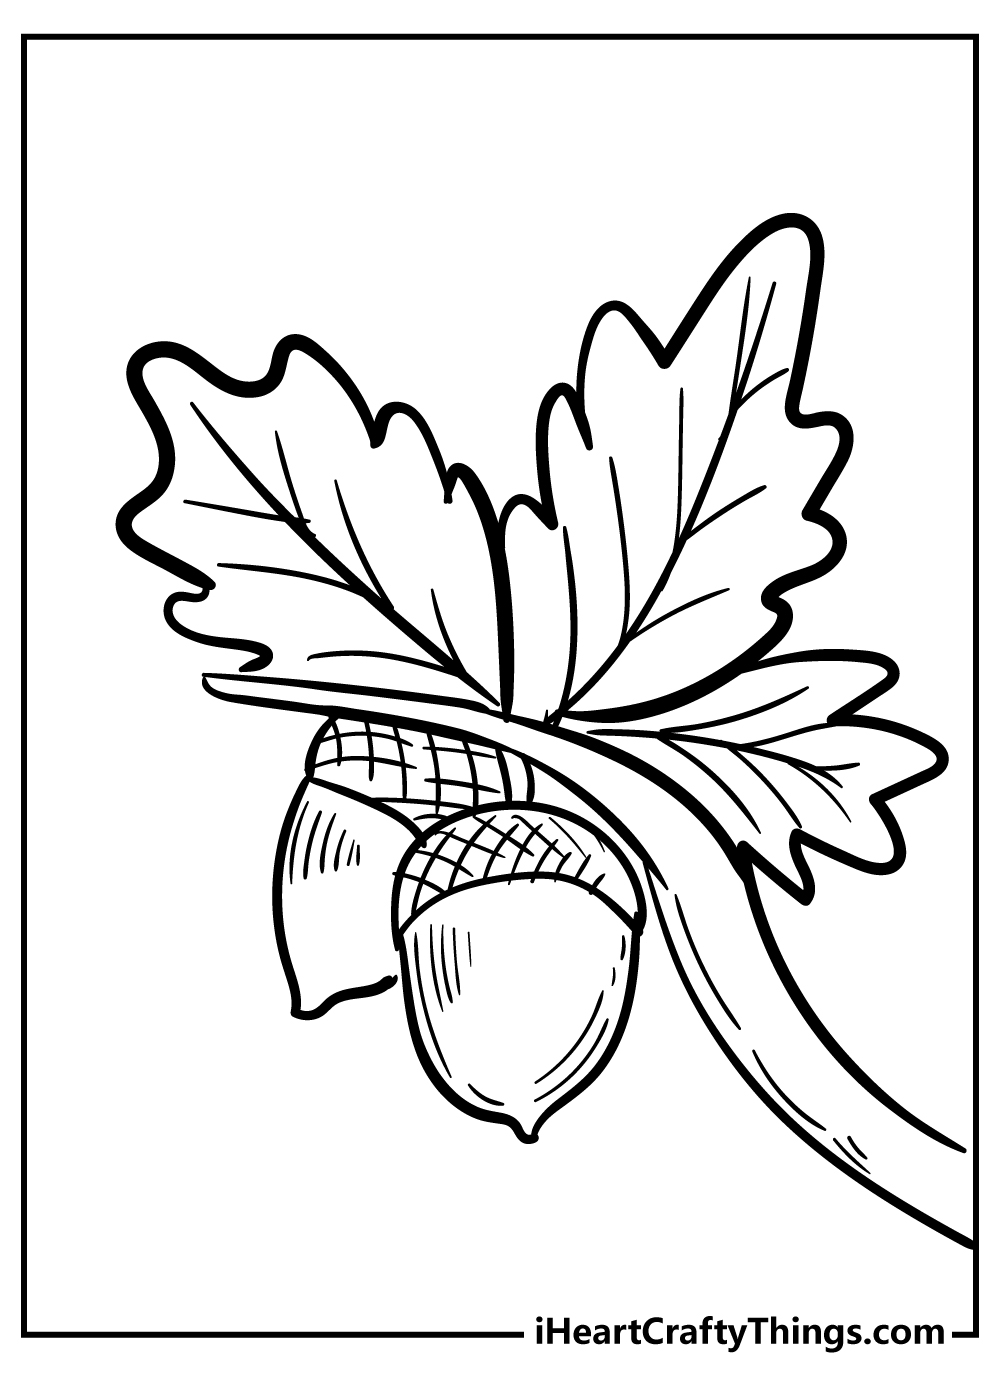 Acorn coloring pages free printables